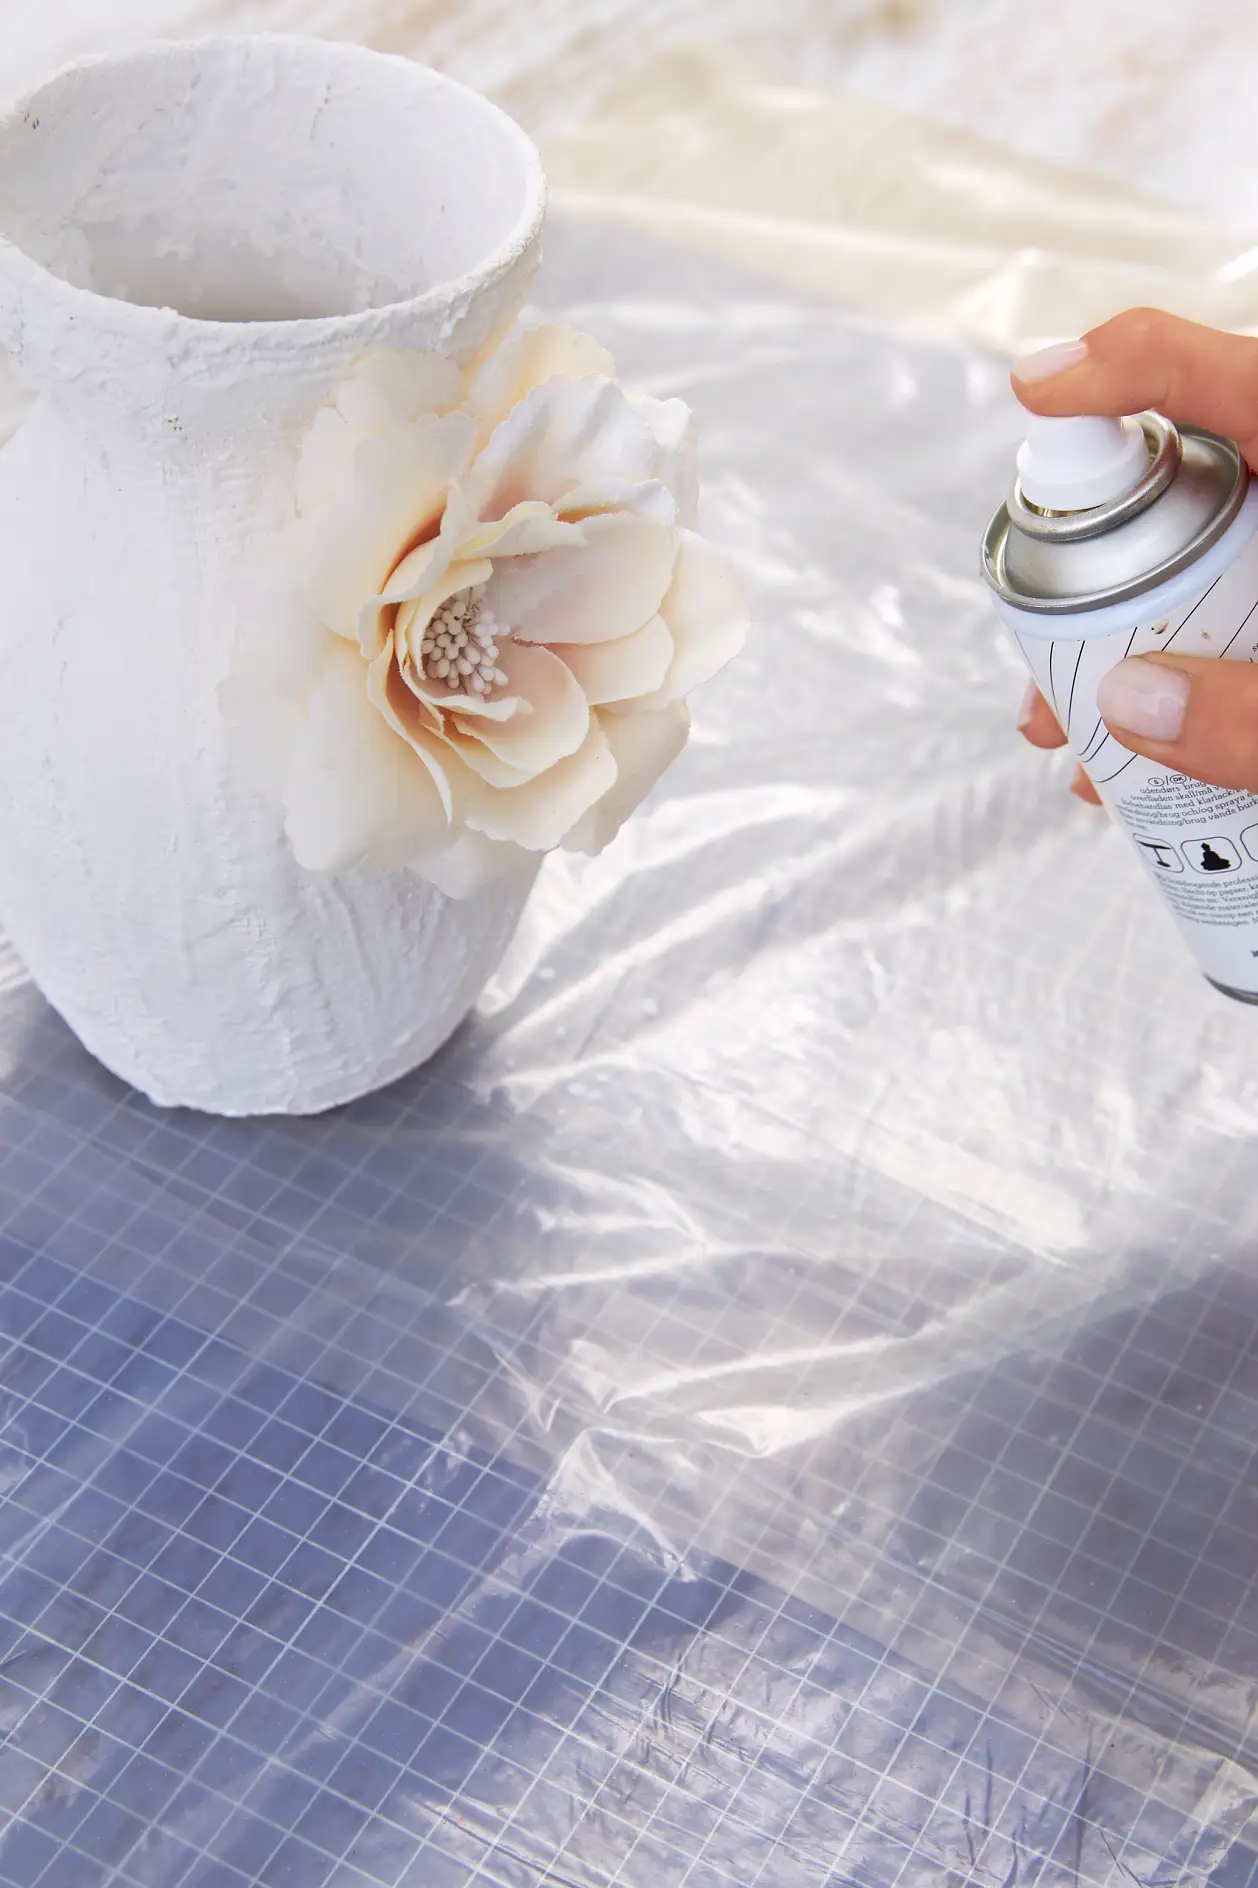 Finish the vase with white spray paint.